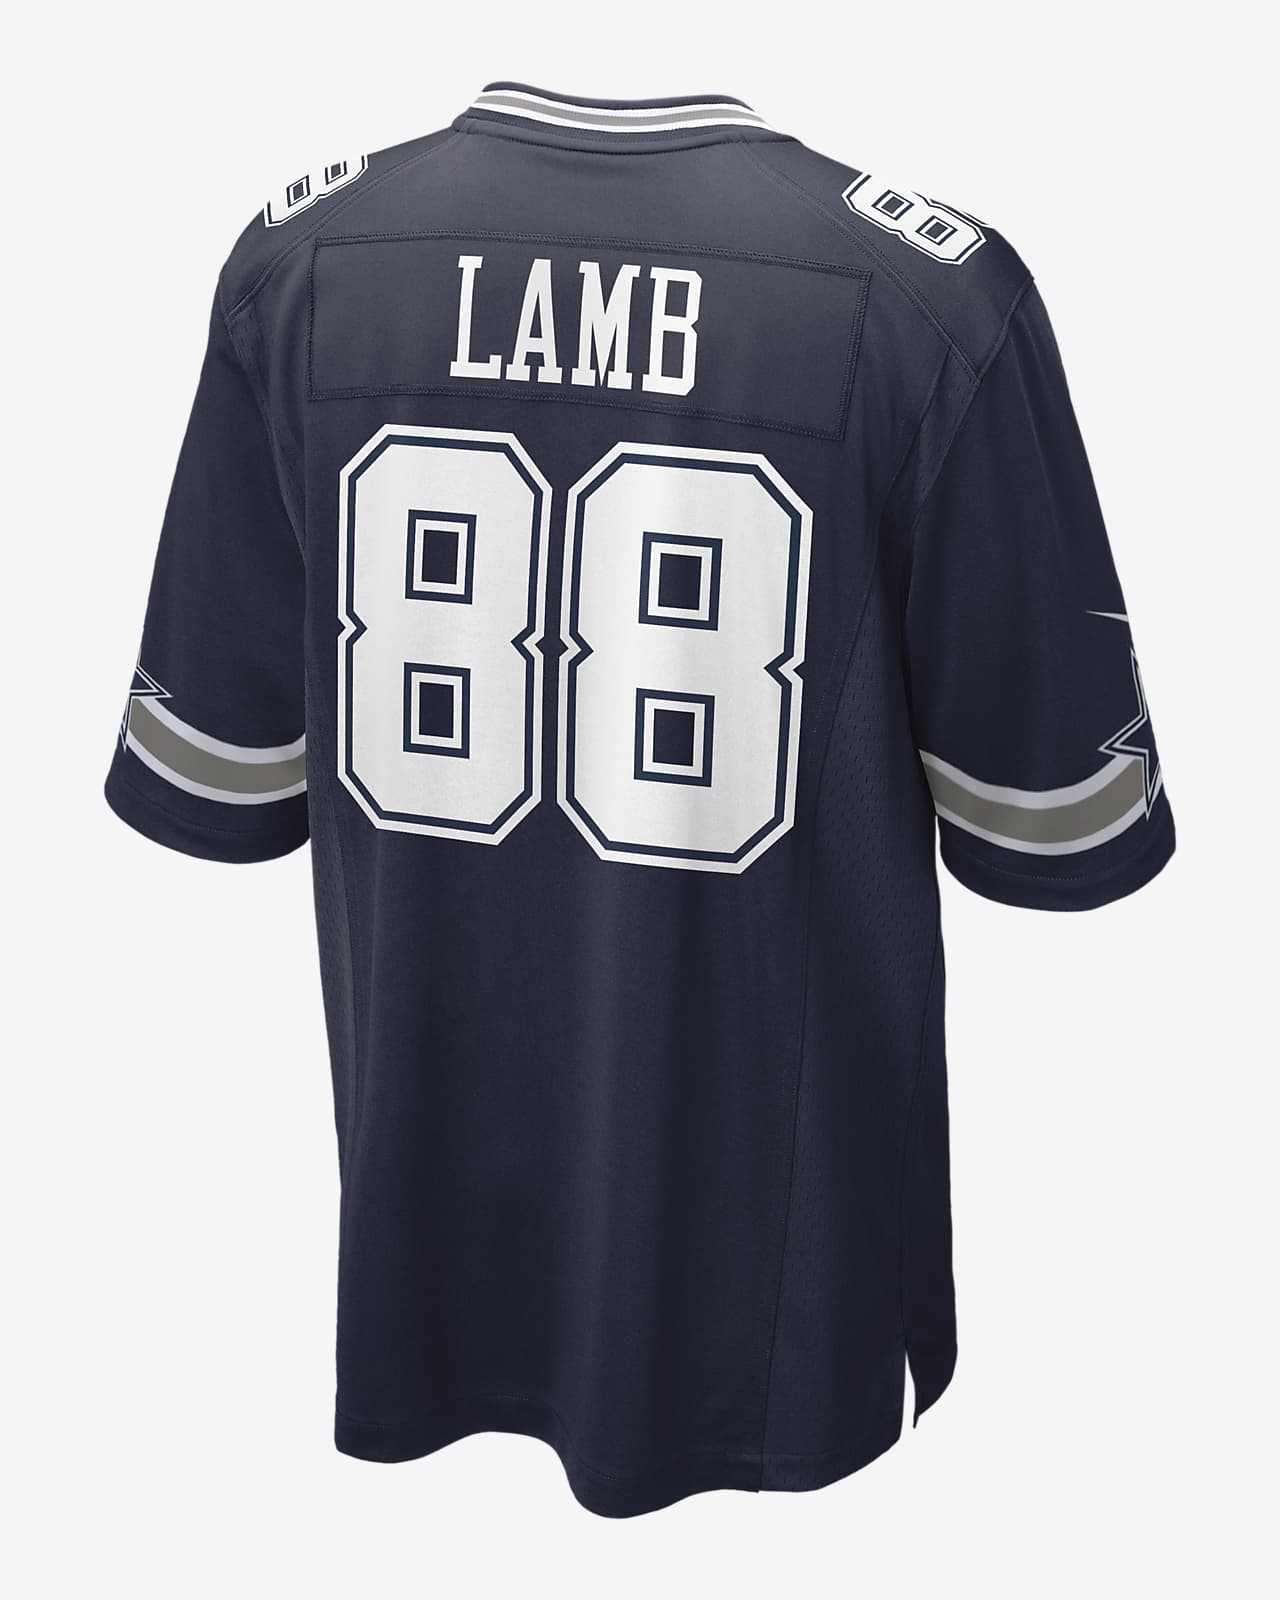 Dallas Cowboys Youth Xl Jersey Top Sellers -  1693179863